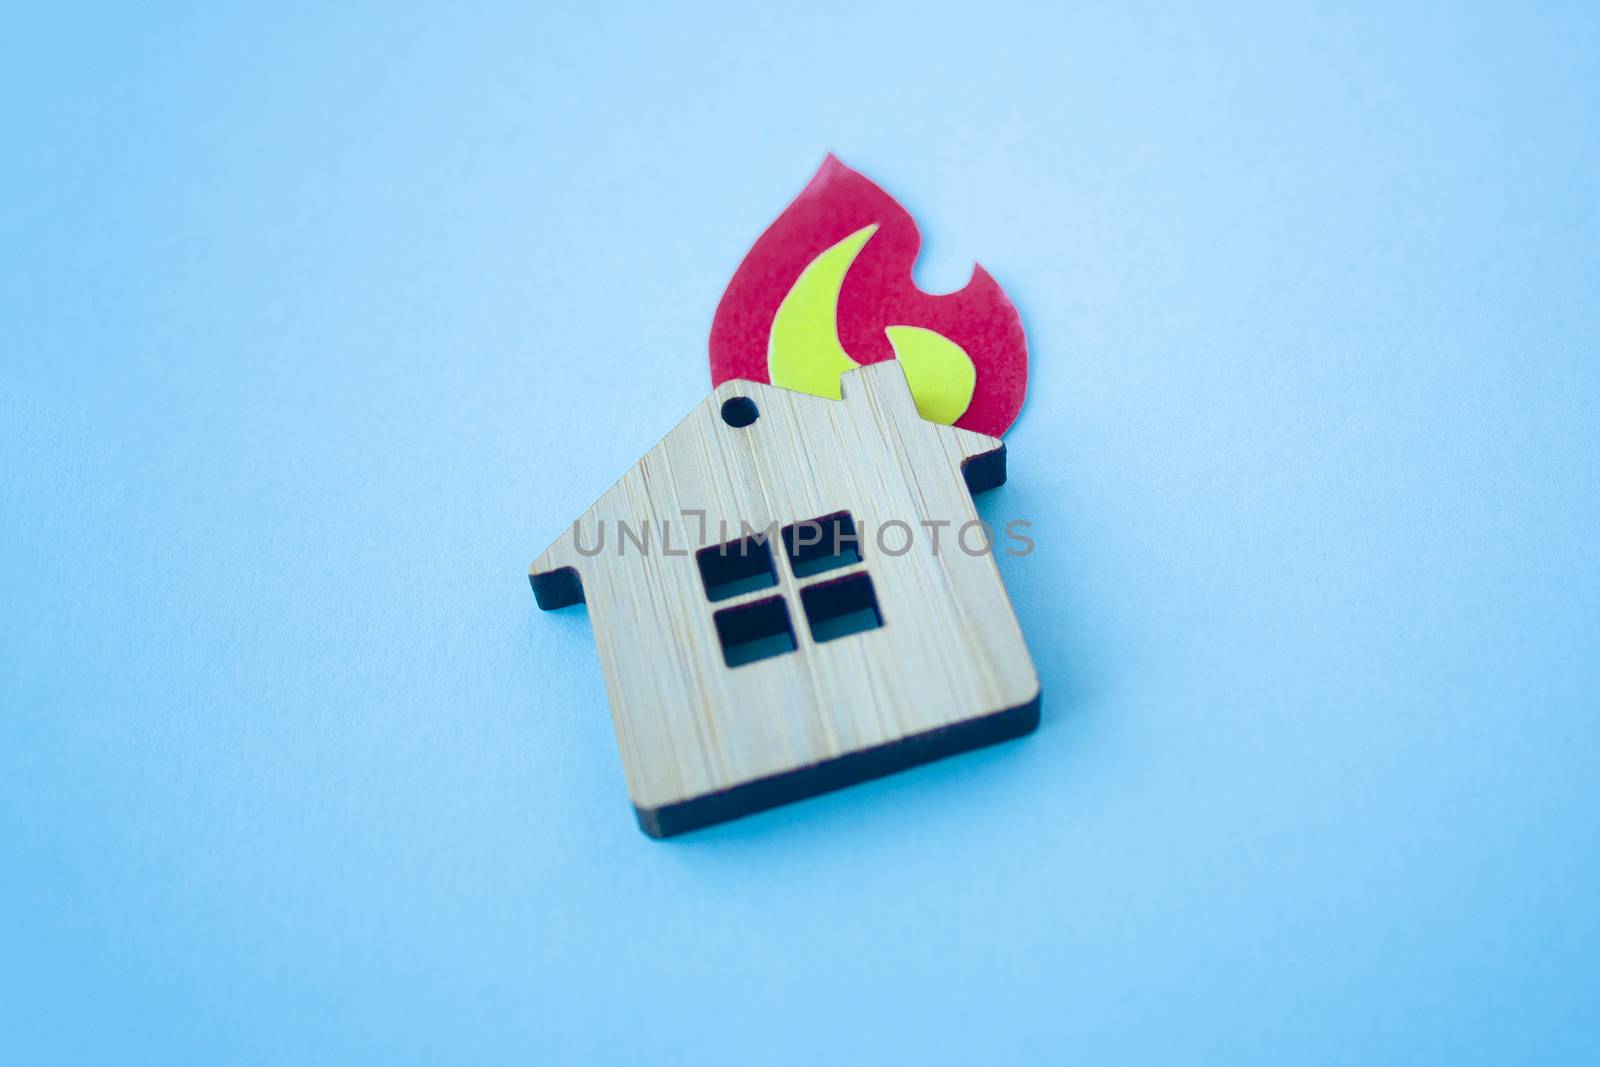 Fire house, insurance and mortgage concept. Small wooden house toy and paper fire shape on blue background side view with copy space